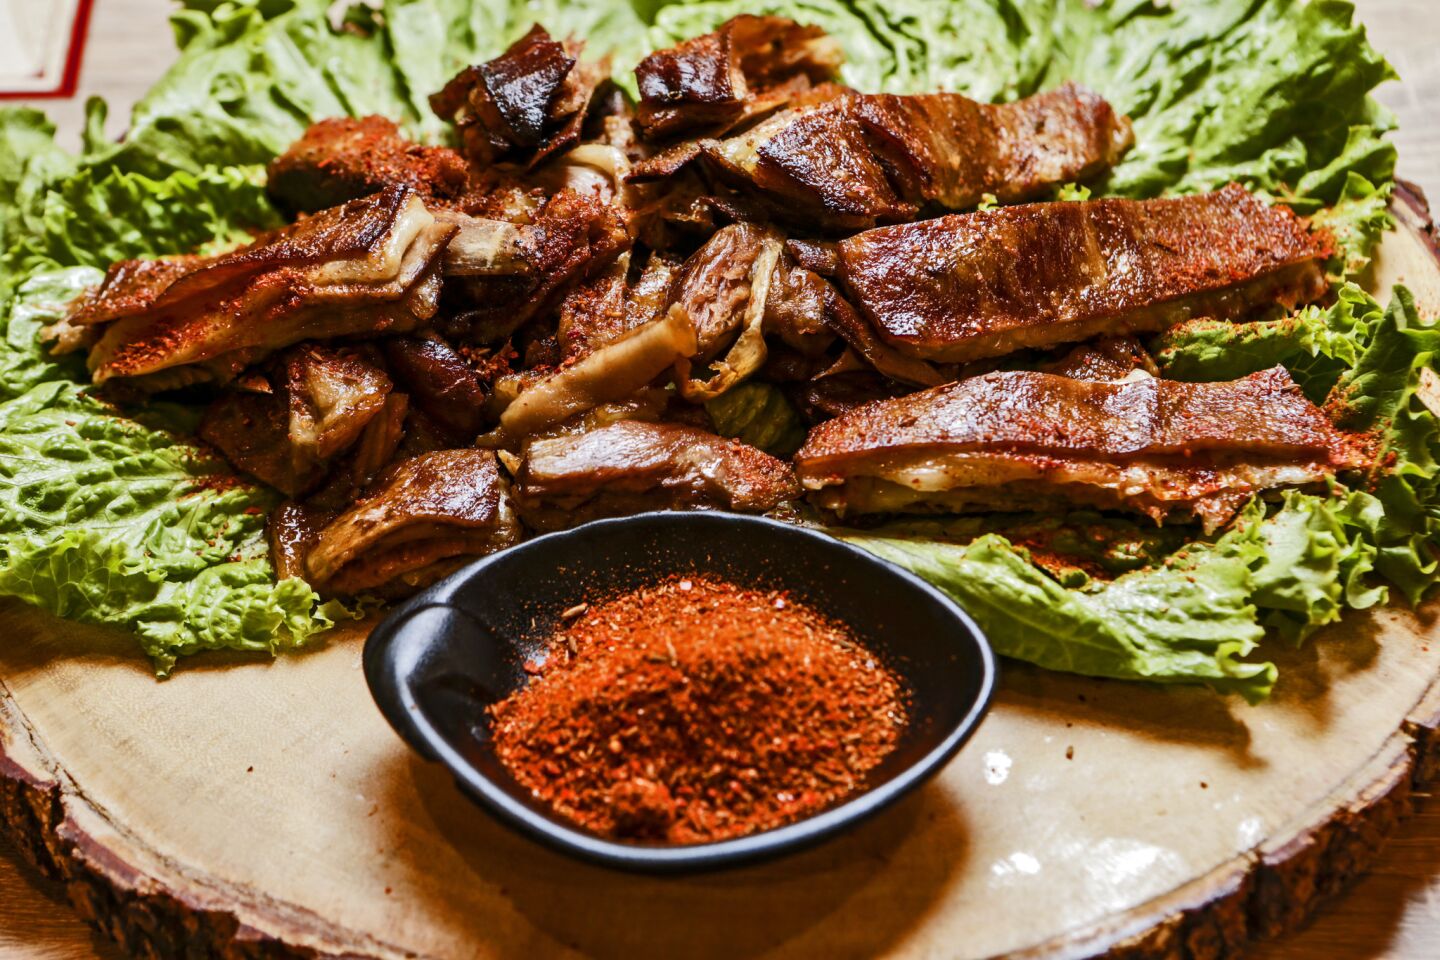 Smoked lamb chops are served with a bowl of spice mix.